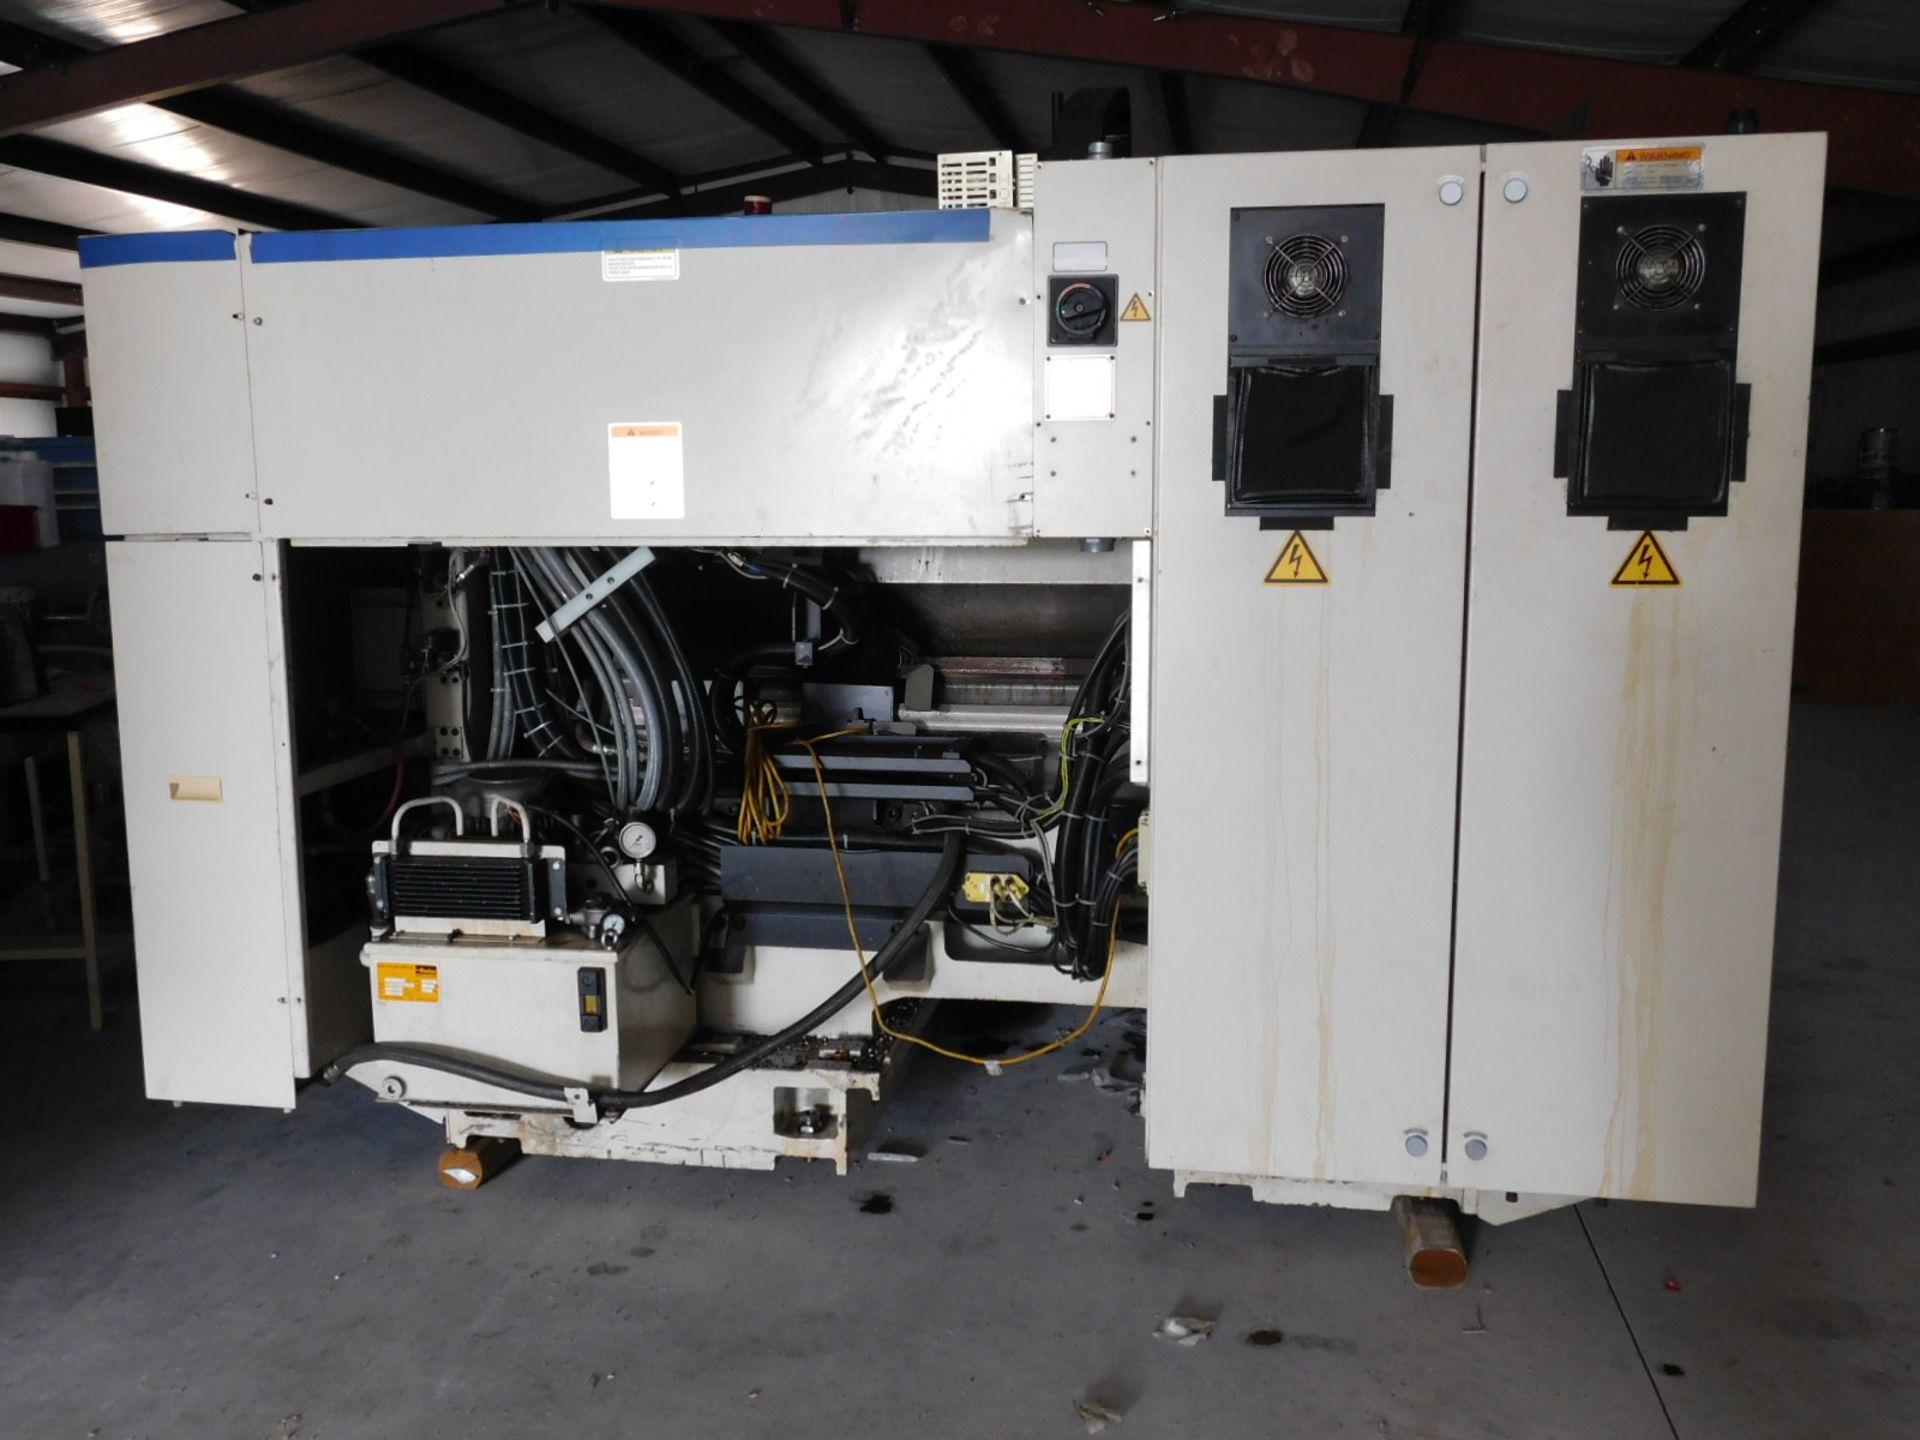 OKUMA CAPTAIN -L370 MW CNC TURNING CENTER, OPS-E100L CNC CONTROL, MAX SWING OVER BED: 20.08", - Image 5 of 9